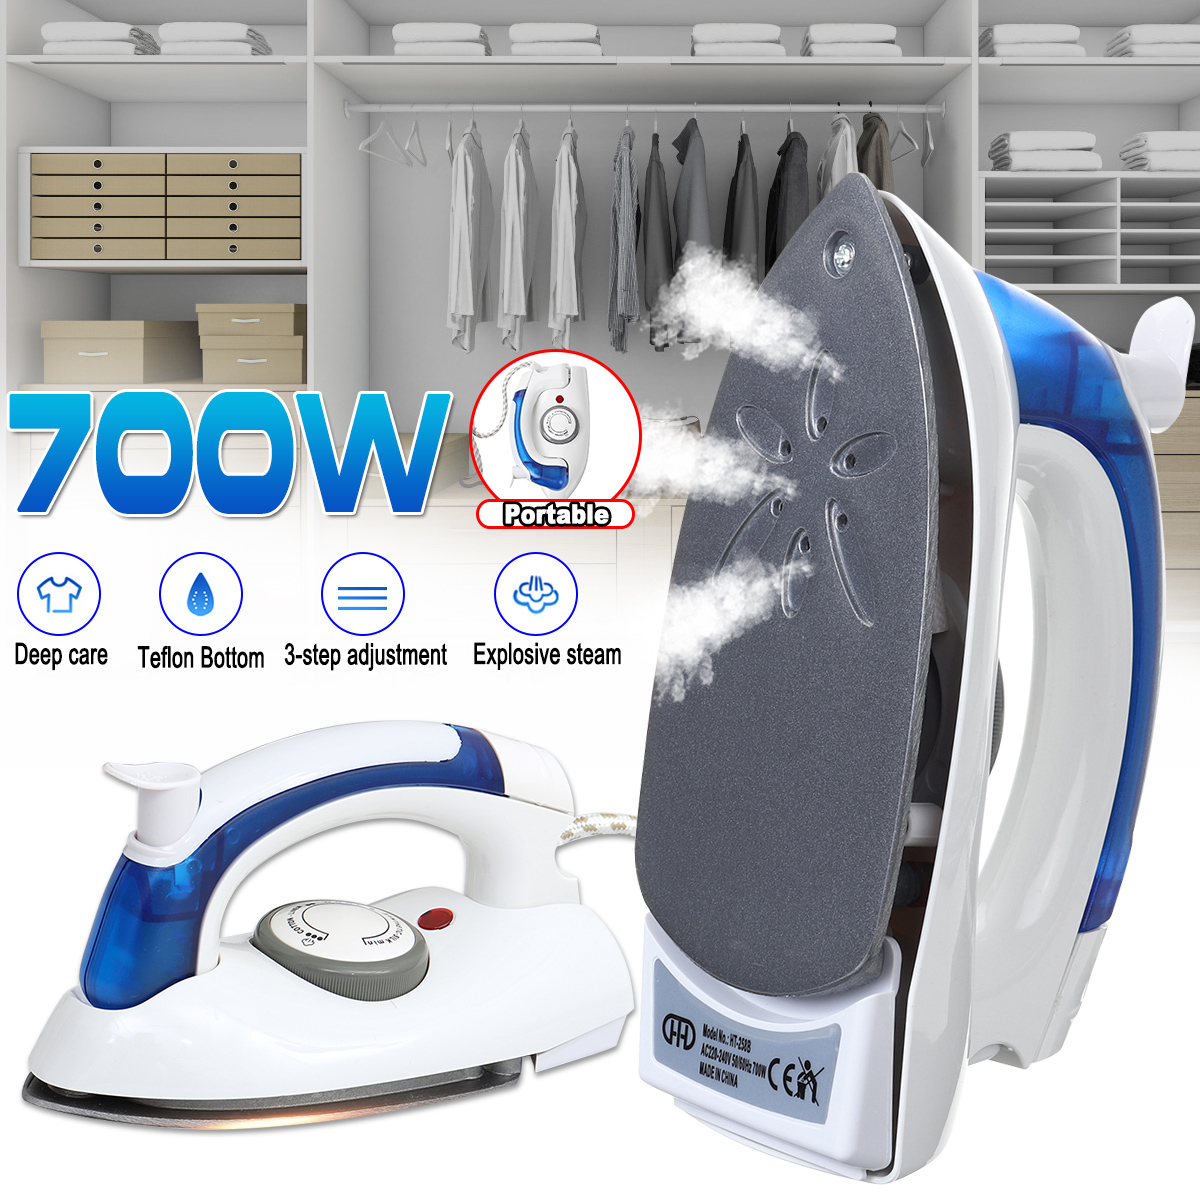 700W-Portable-Handheld-Foldable-Electric-Steam-Iron-3-Gear-Fast-Heat-Up-Garment-Steamer-Wrinkle-Remo-1754049-2